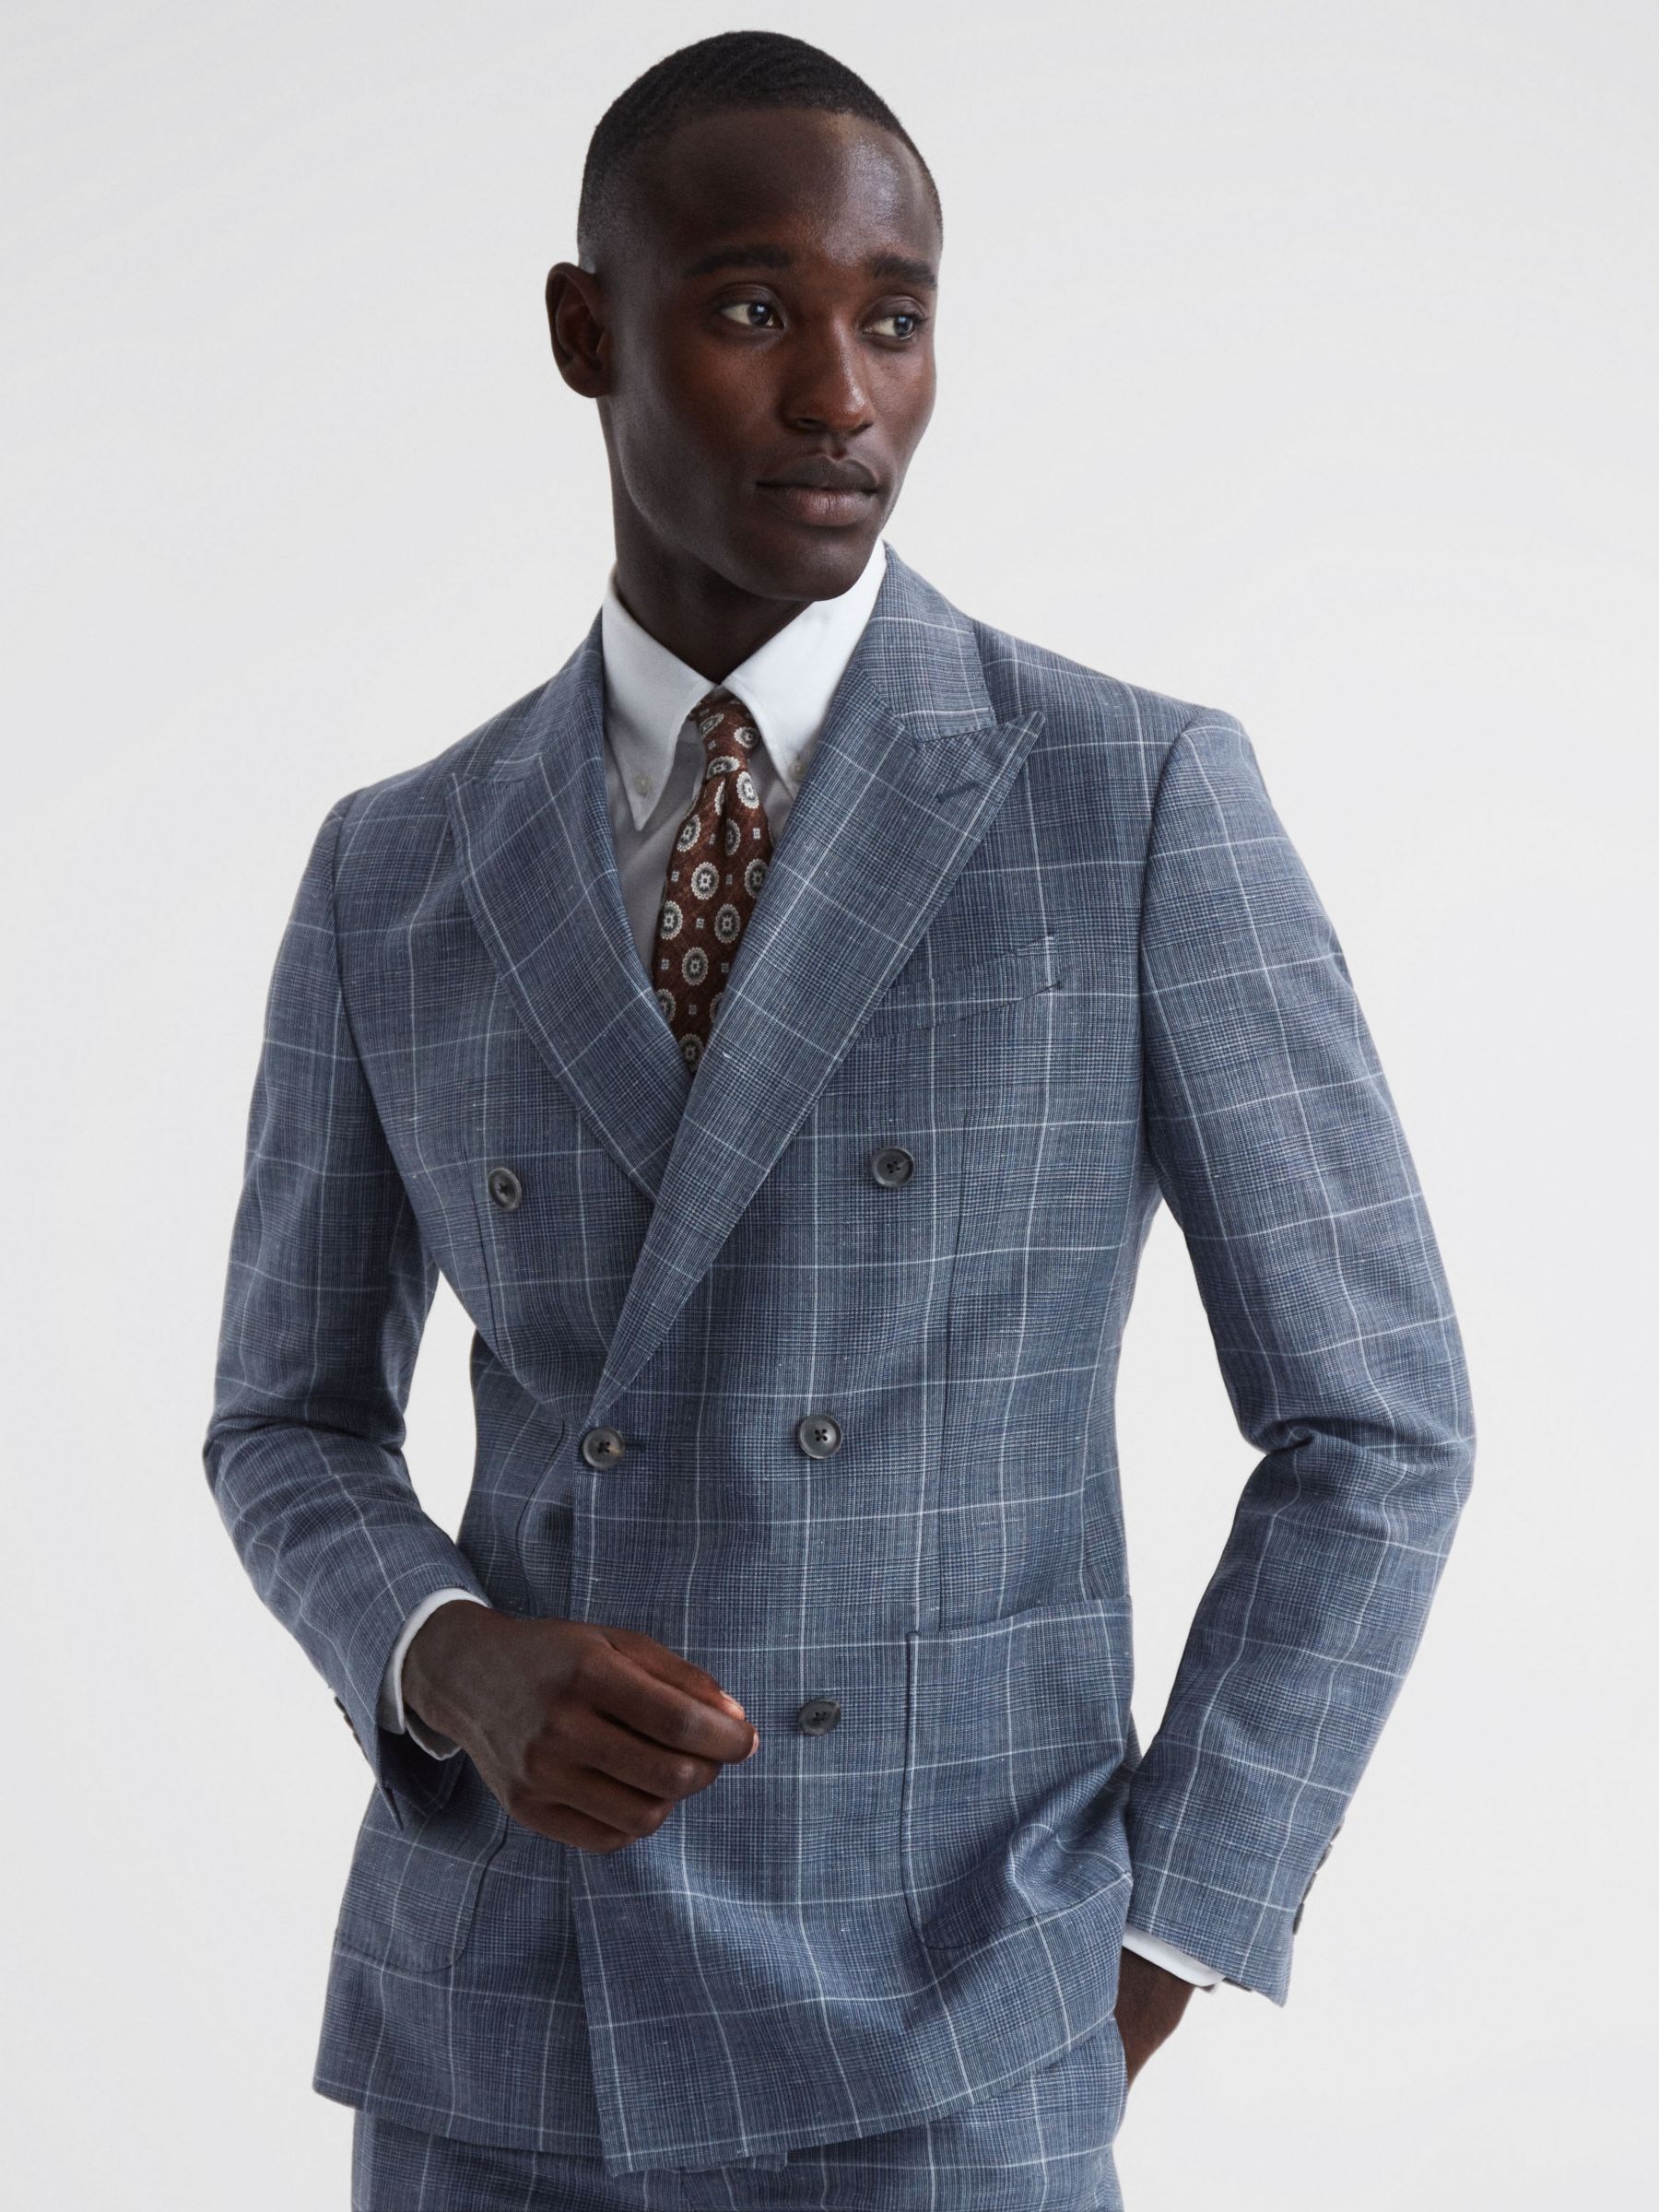 Reiss Aintree Tailored Fit Wool and Linen Check Suit Jacket, Indigo